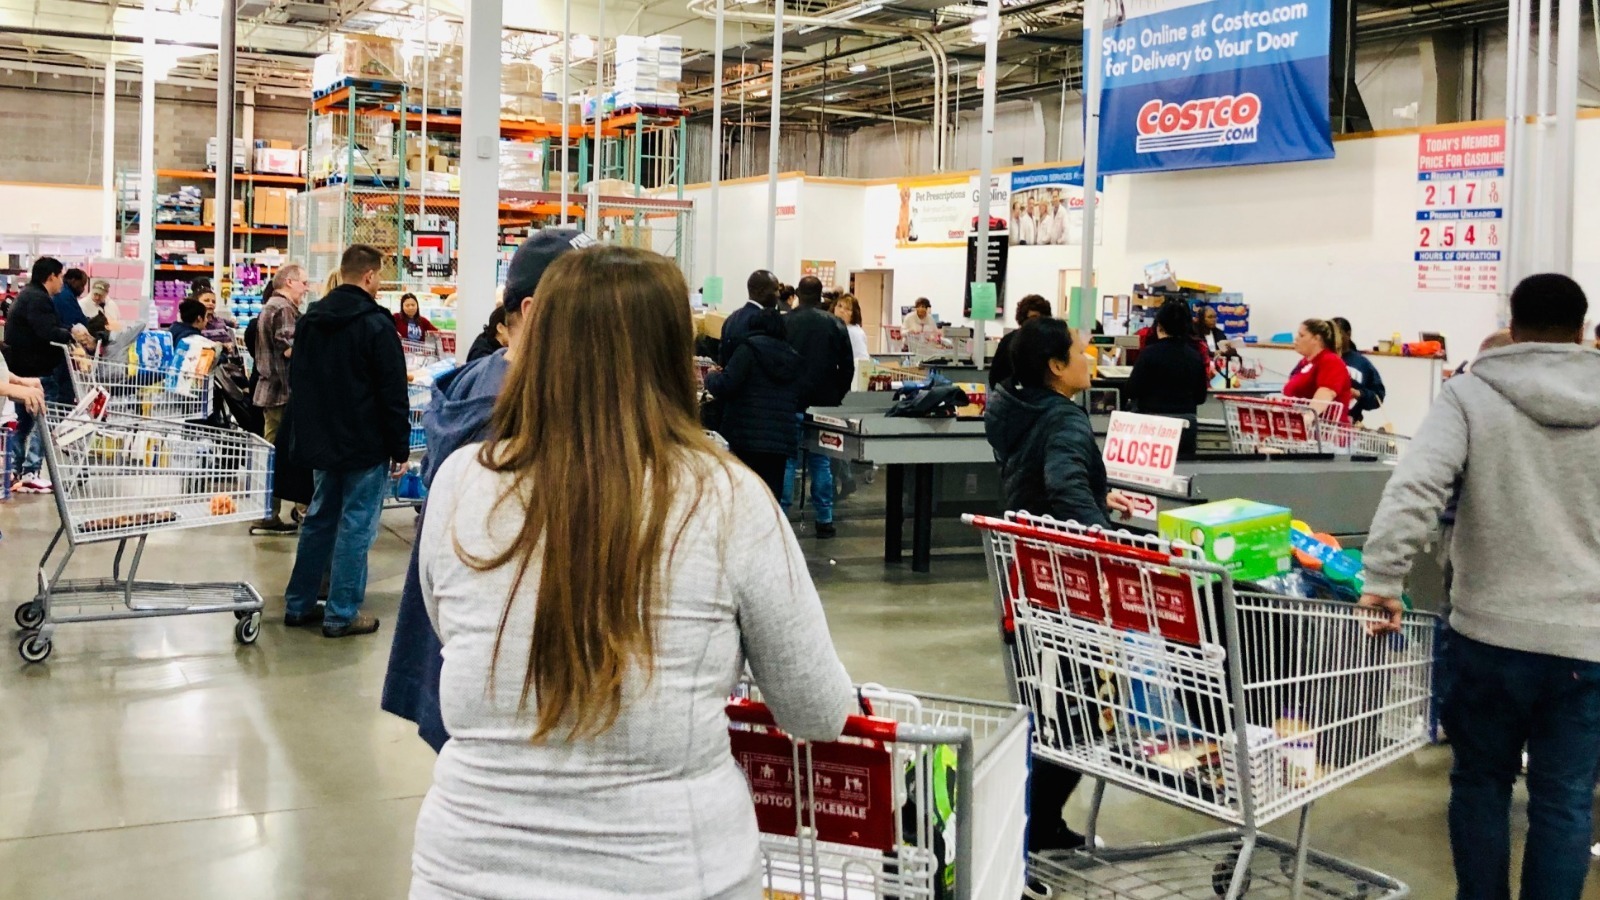 reddit-has-a-costco-hack-that-saves-you-time-in-the-checkout-line